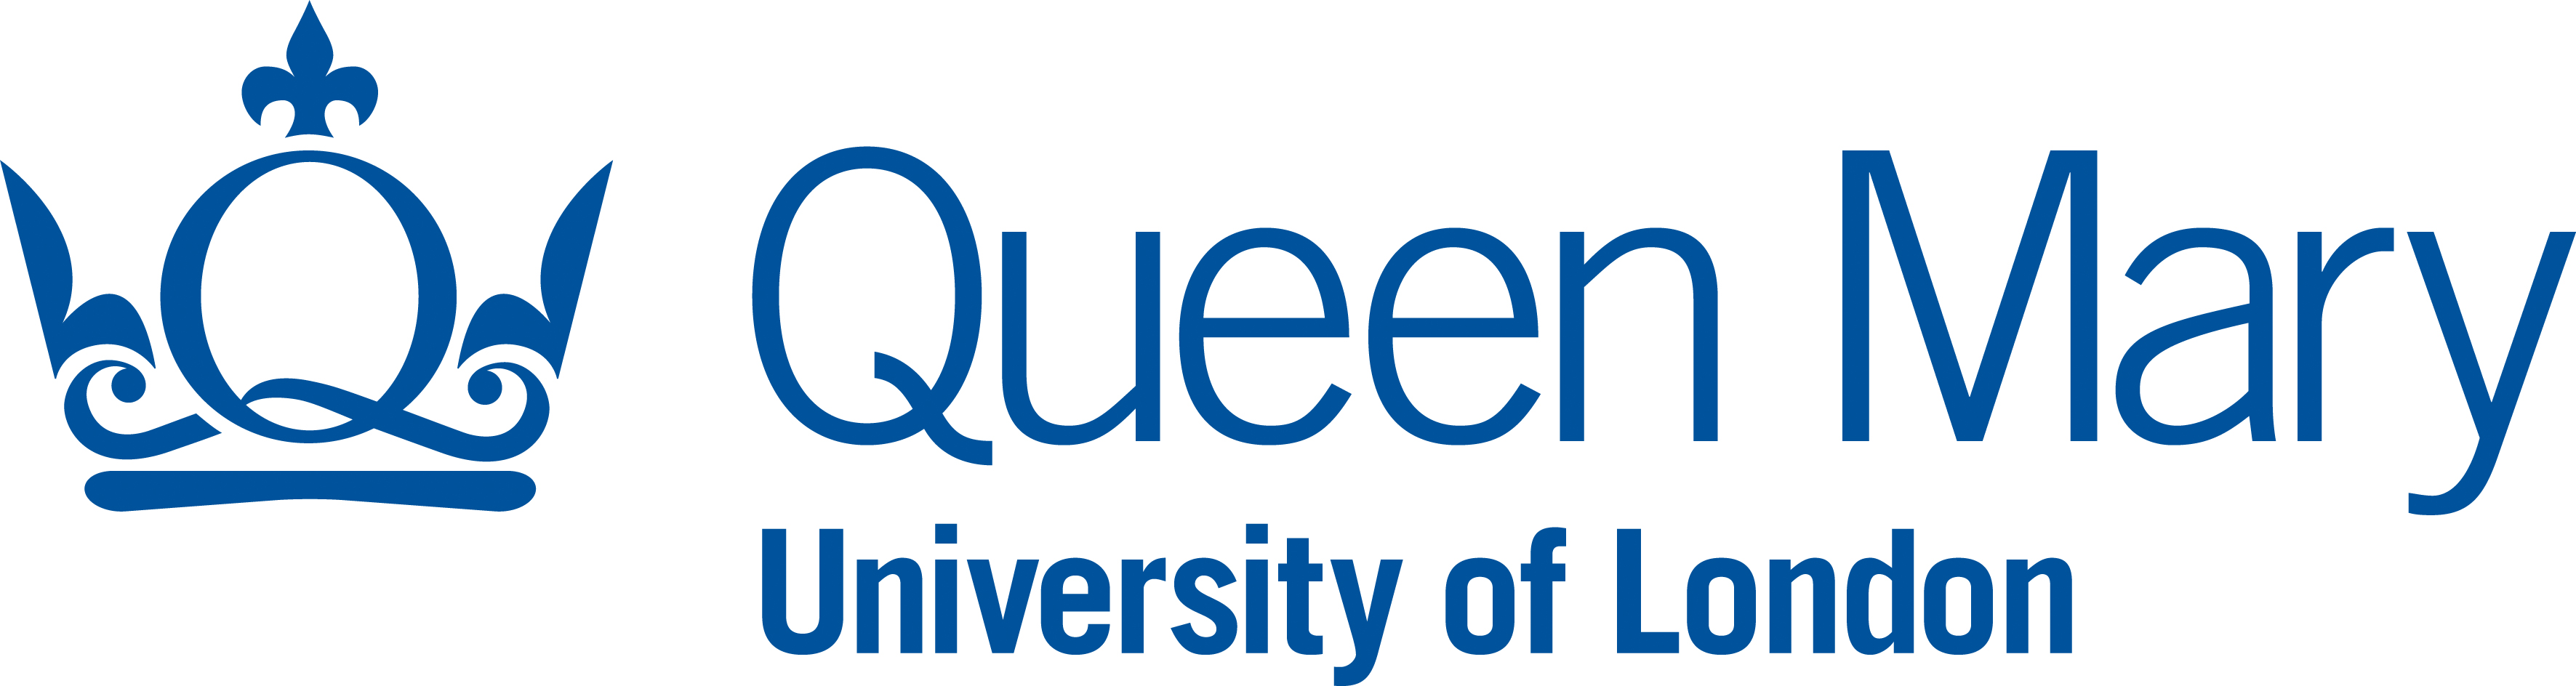 Transforming Software Testing at Queen Mary University of London